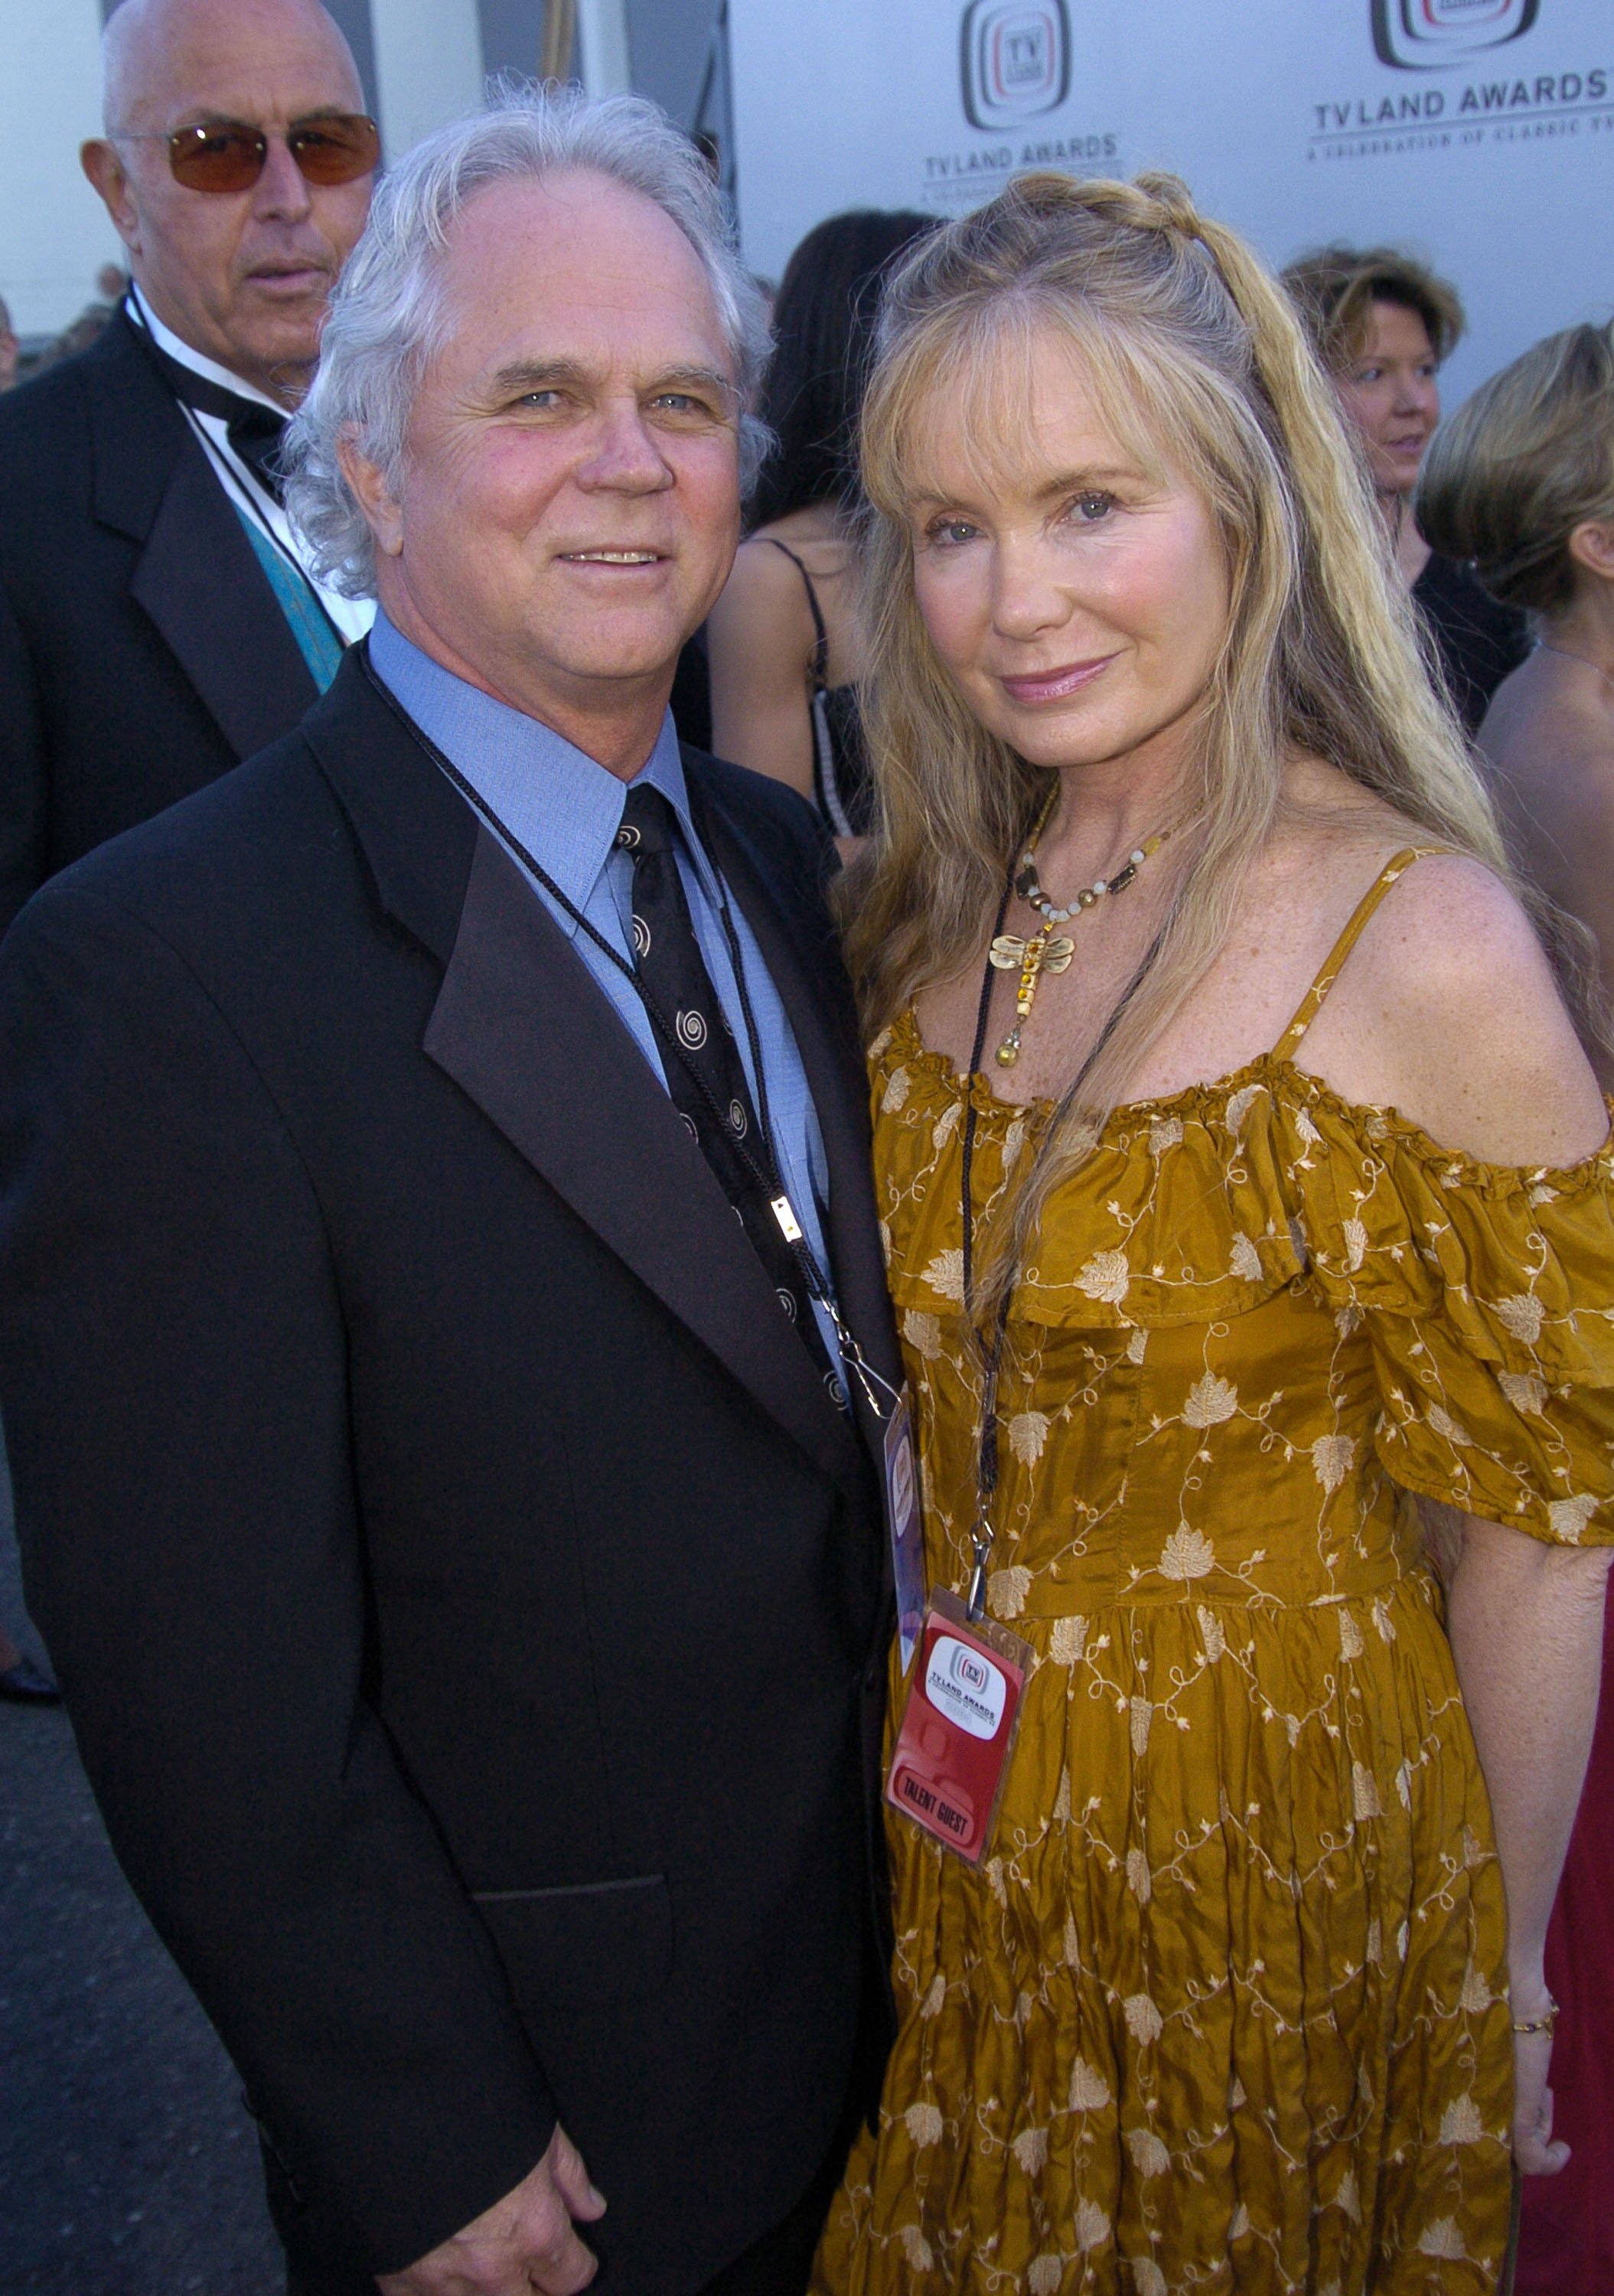 Tony Dow and Lauren Shulkind during 2004 TV Land Awards airing March 17, 2004 - Red Carpet Arrivals at The Palladium in Hollywood, California, United States. | Source: Getty Images